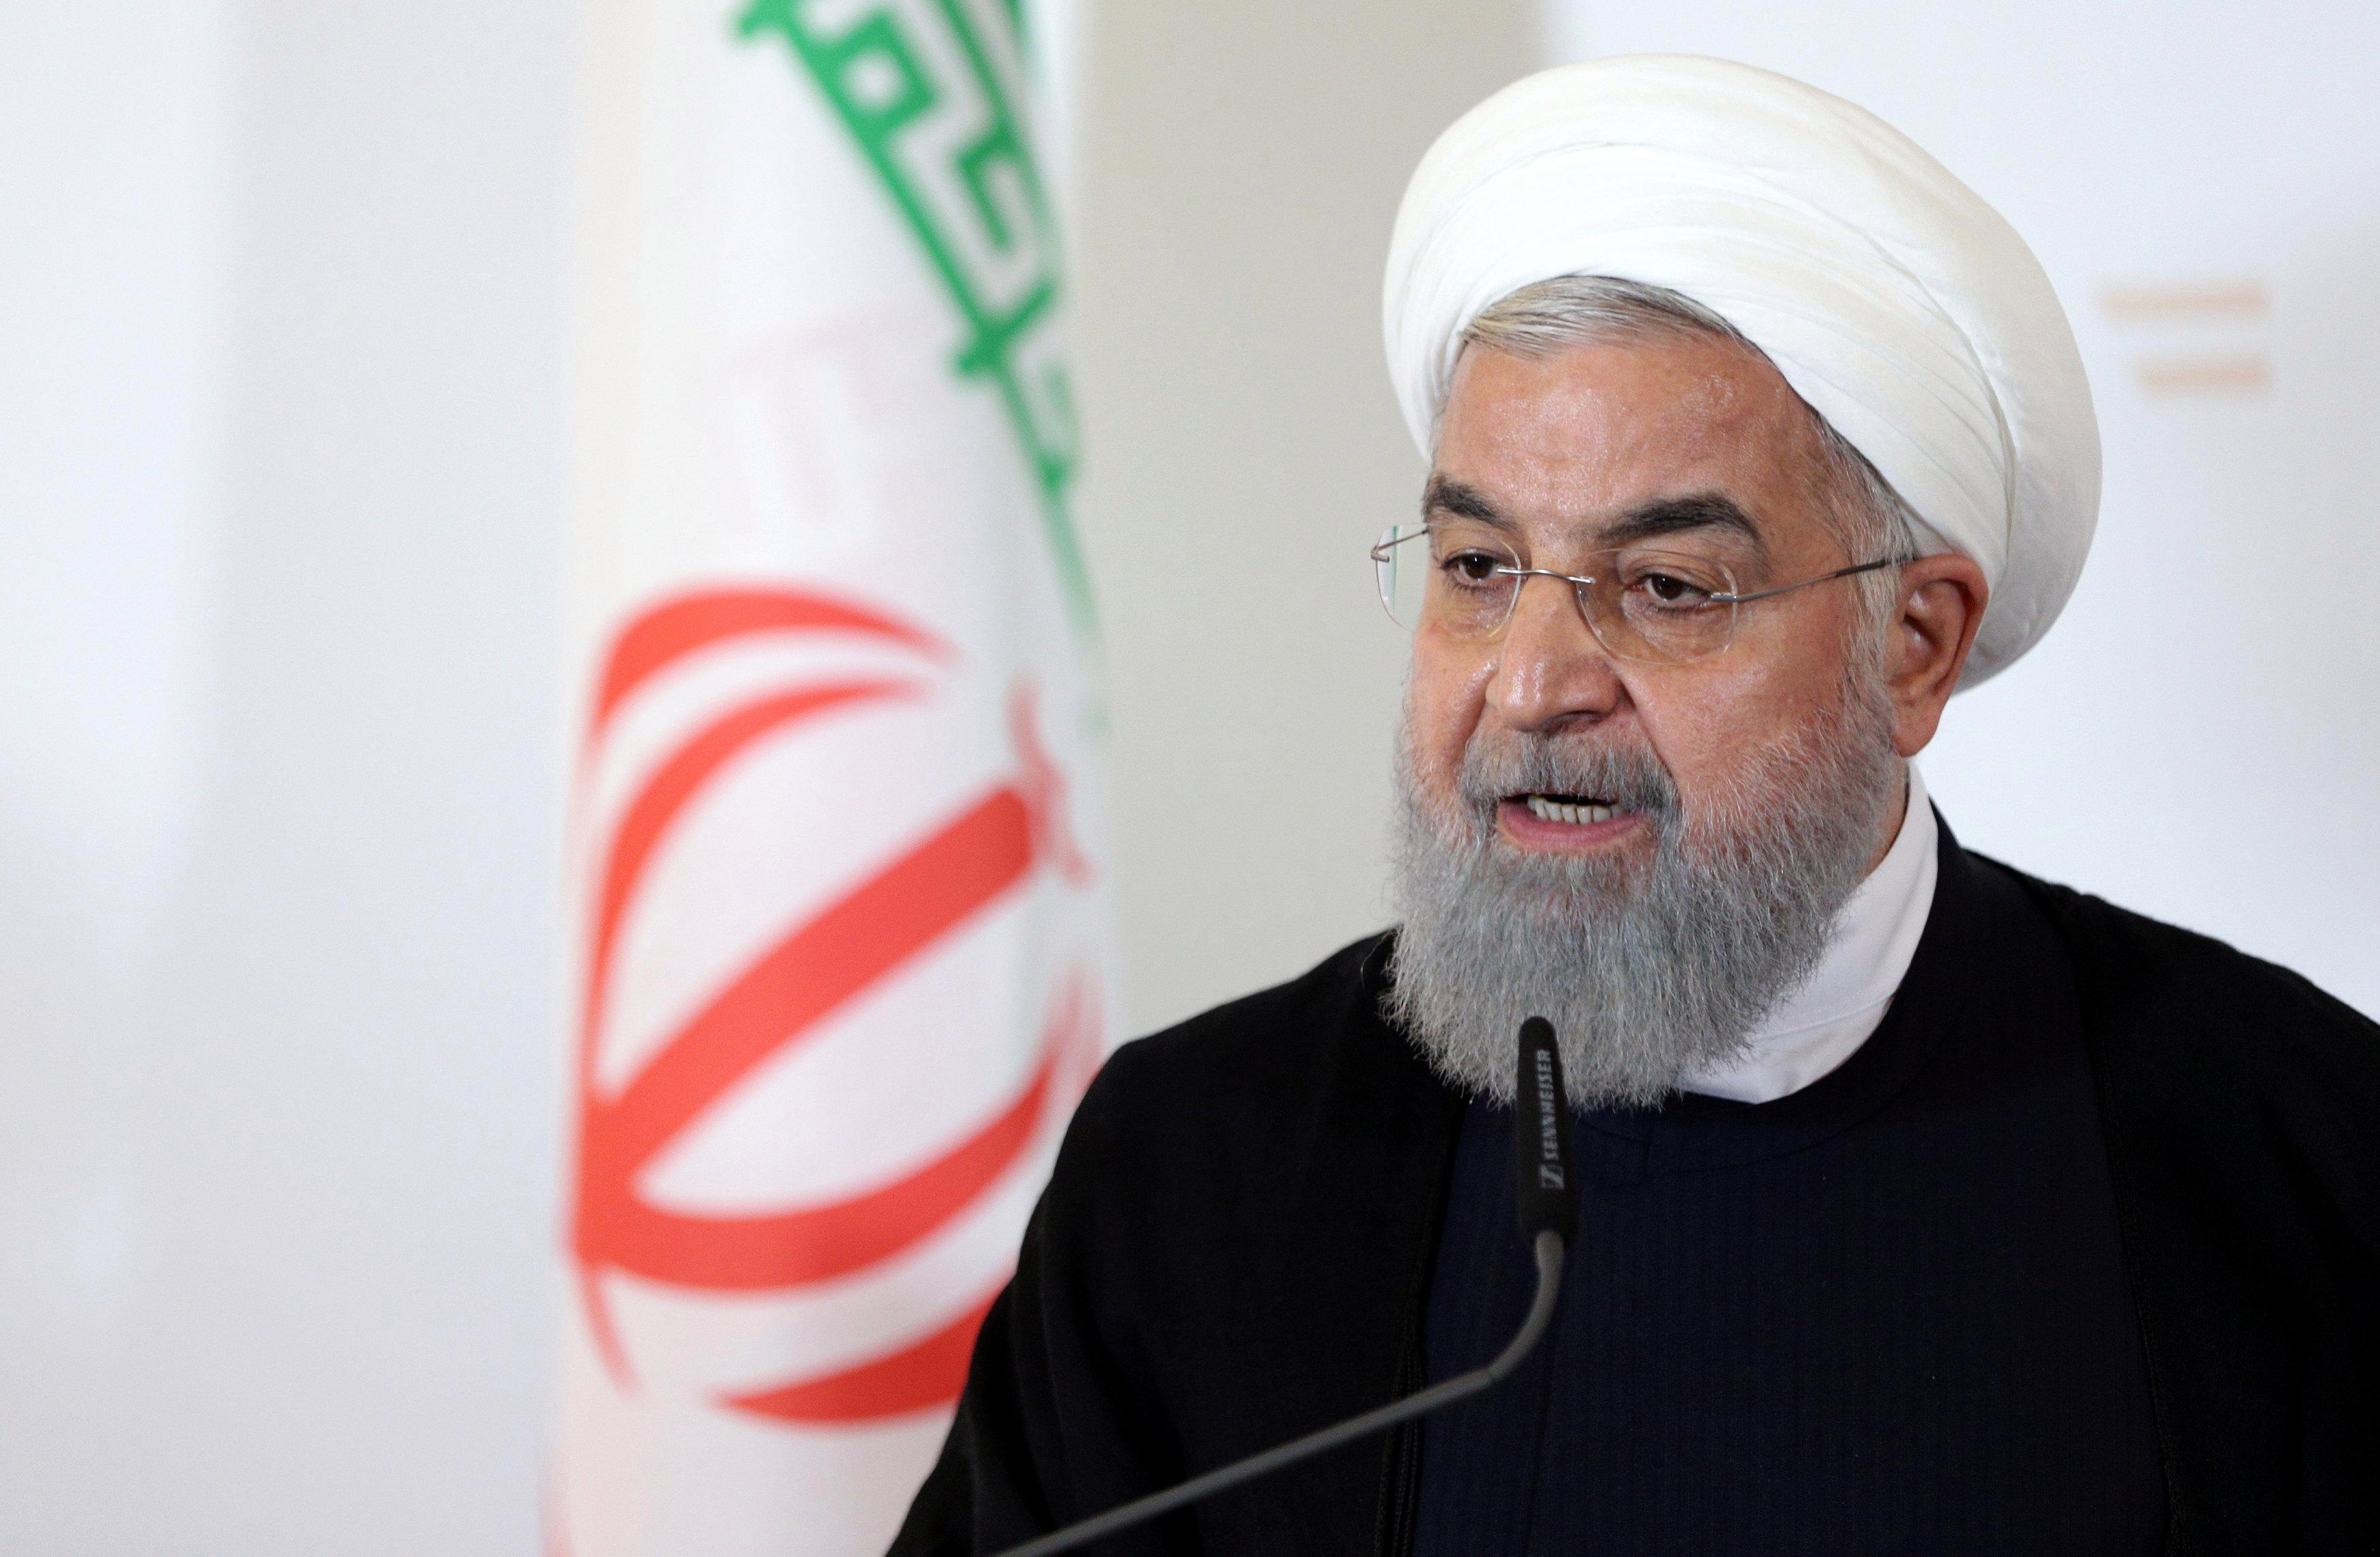 Iranian President Rouhani: We are deeply sorry by this disastrous mistake